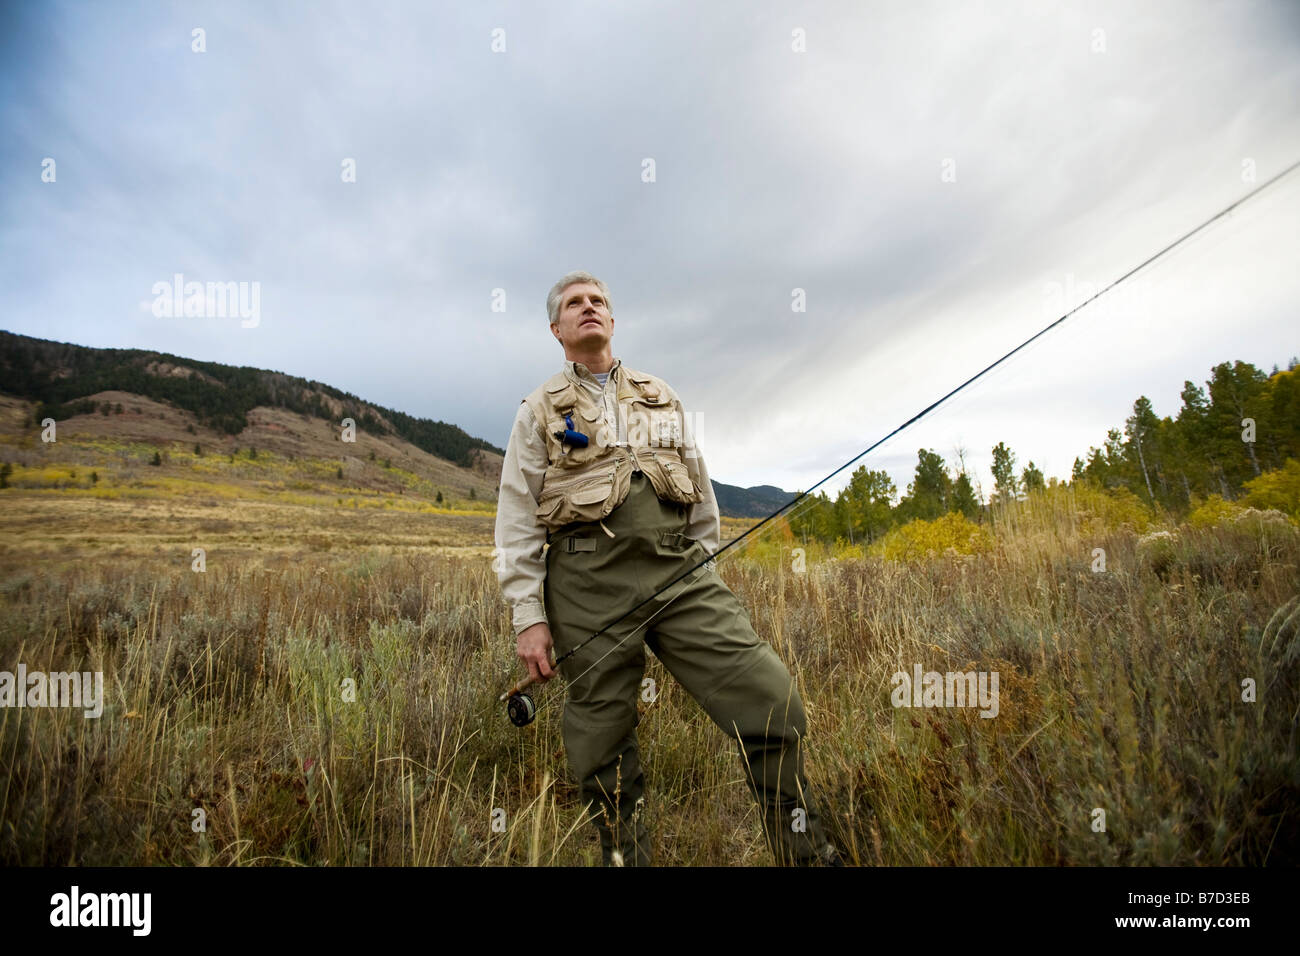 A man standing in a field with a fly rod Stock Photo